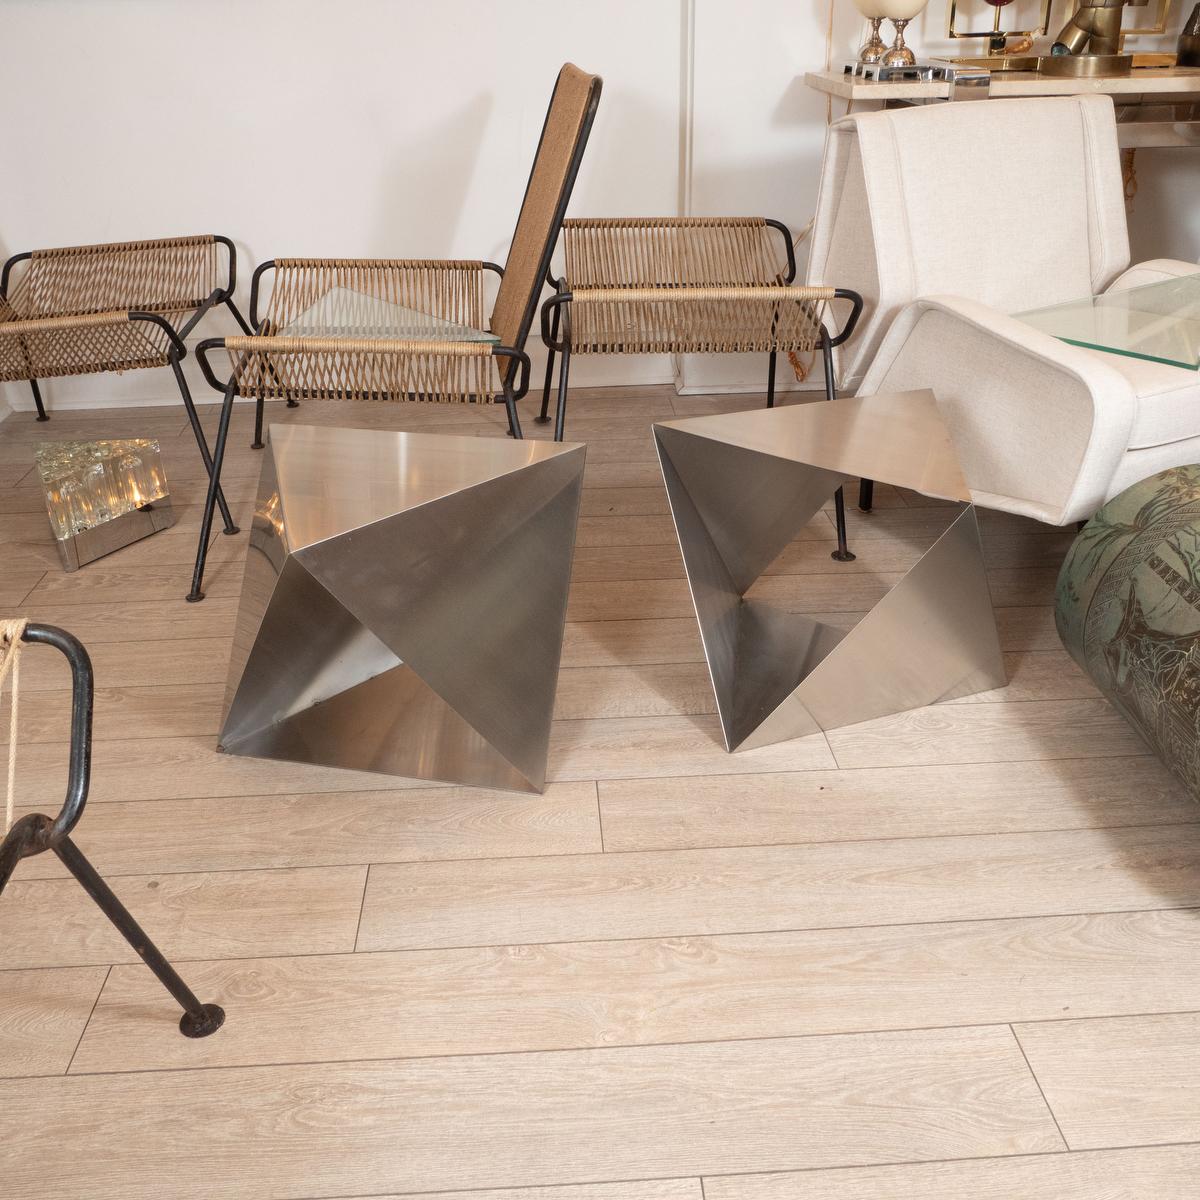 Modular, metal polyhedron side tables by Manfredo Massironi. Sold individually.